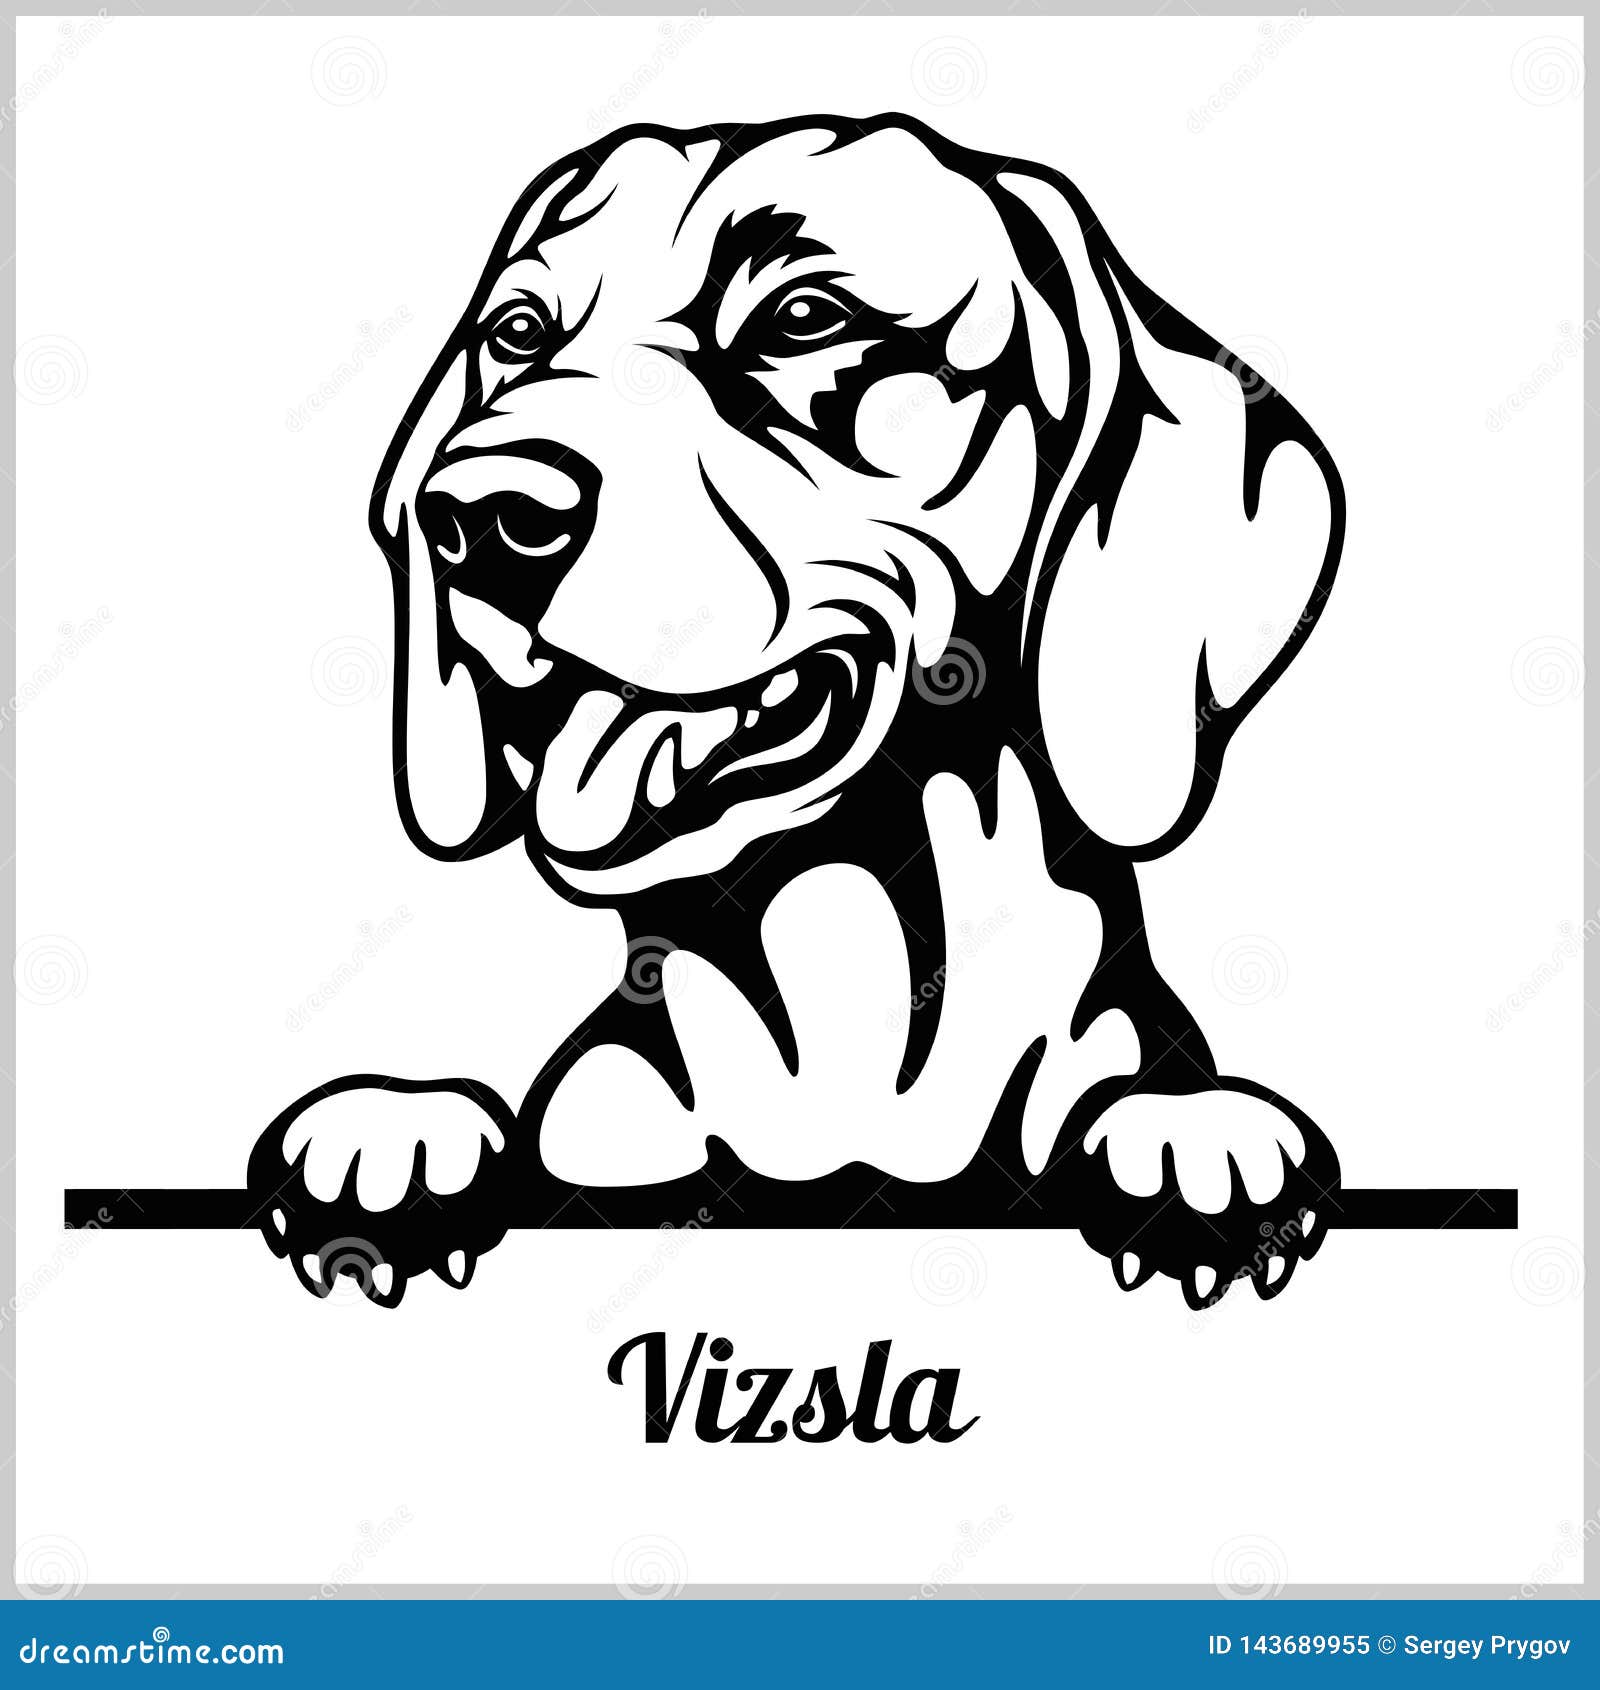 Vizsla Cartoons, Illustrations & Vector Stock Images - 455 Pictures to